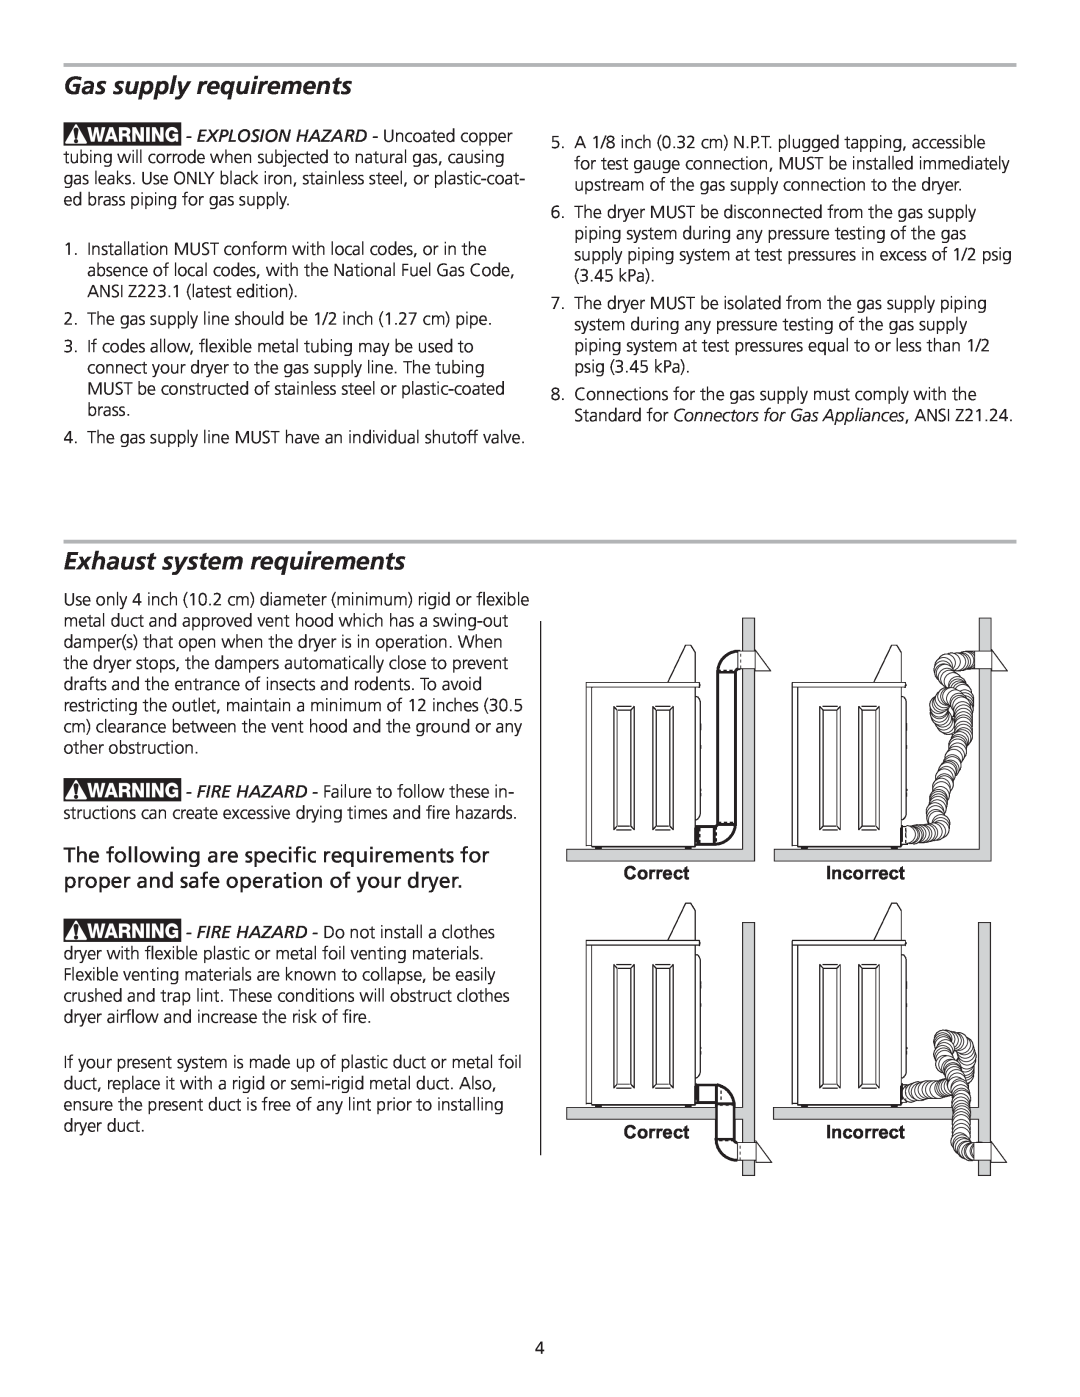 Frigidaire 137153700B Gas supply requirements, Exhaust system requirements, Correct, Incorrect Incorrect 